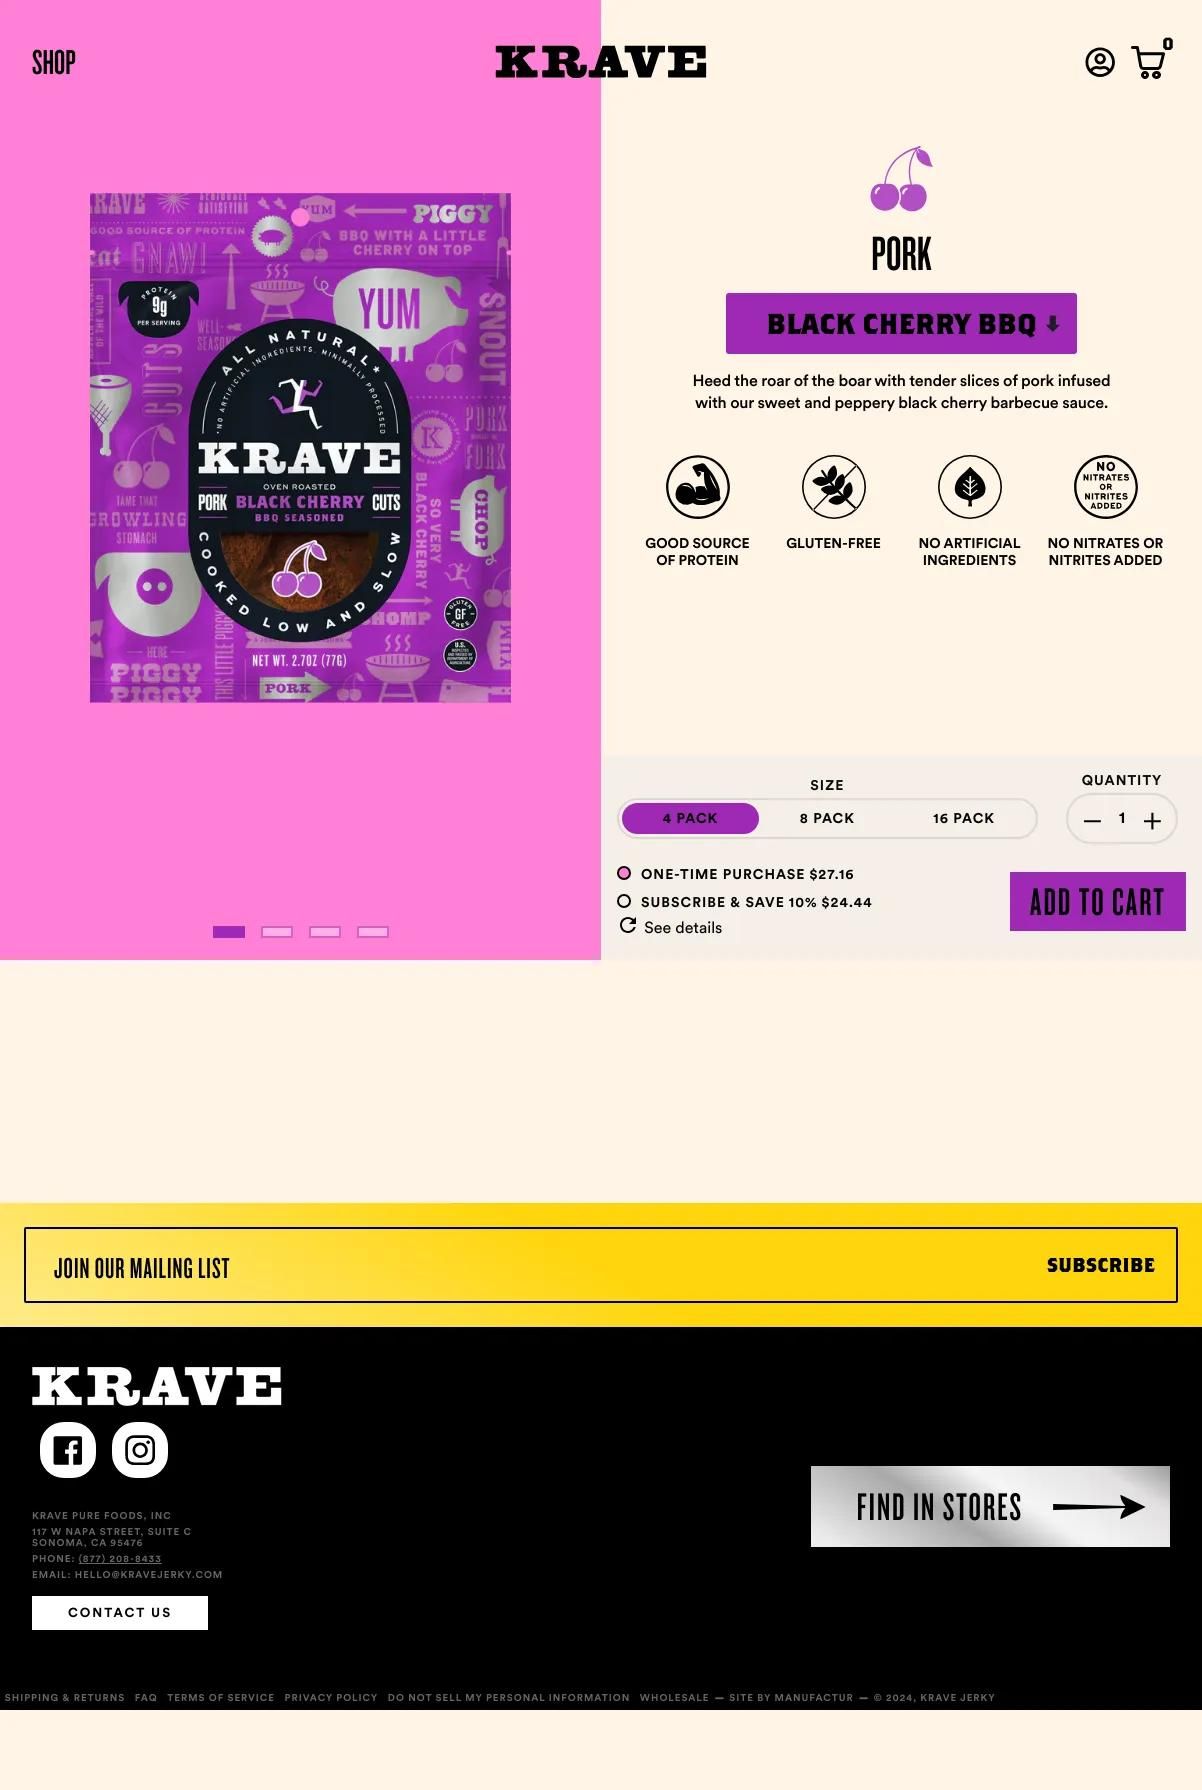 Screenshot 3 of KRAVE Jerky (Example Shopify Food and Beverage Website)